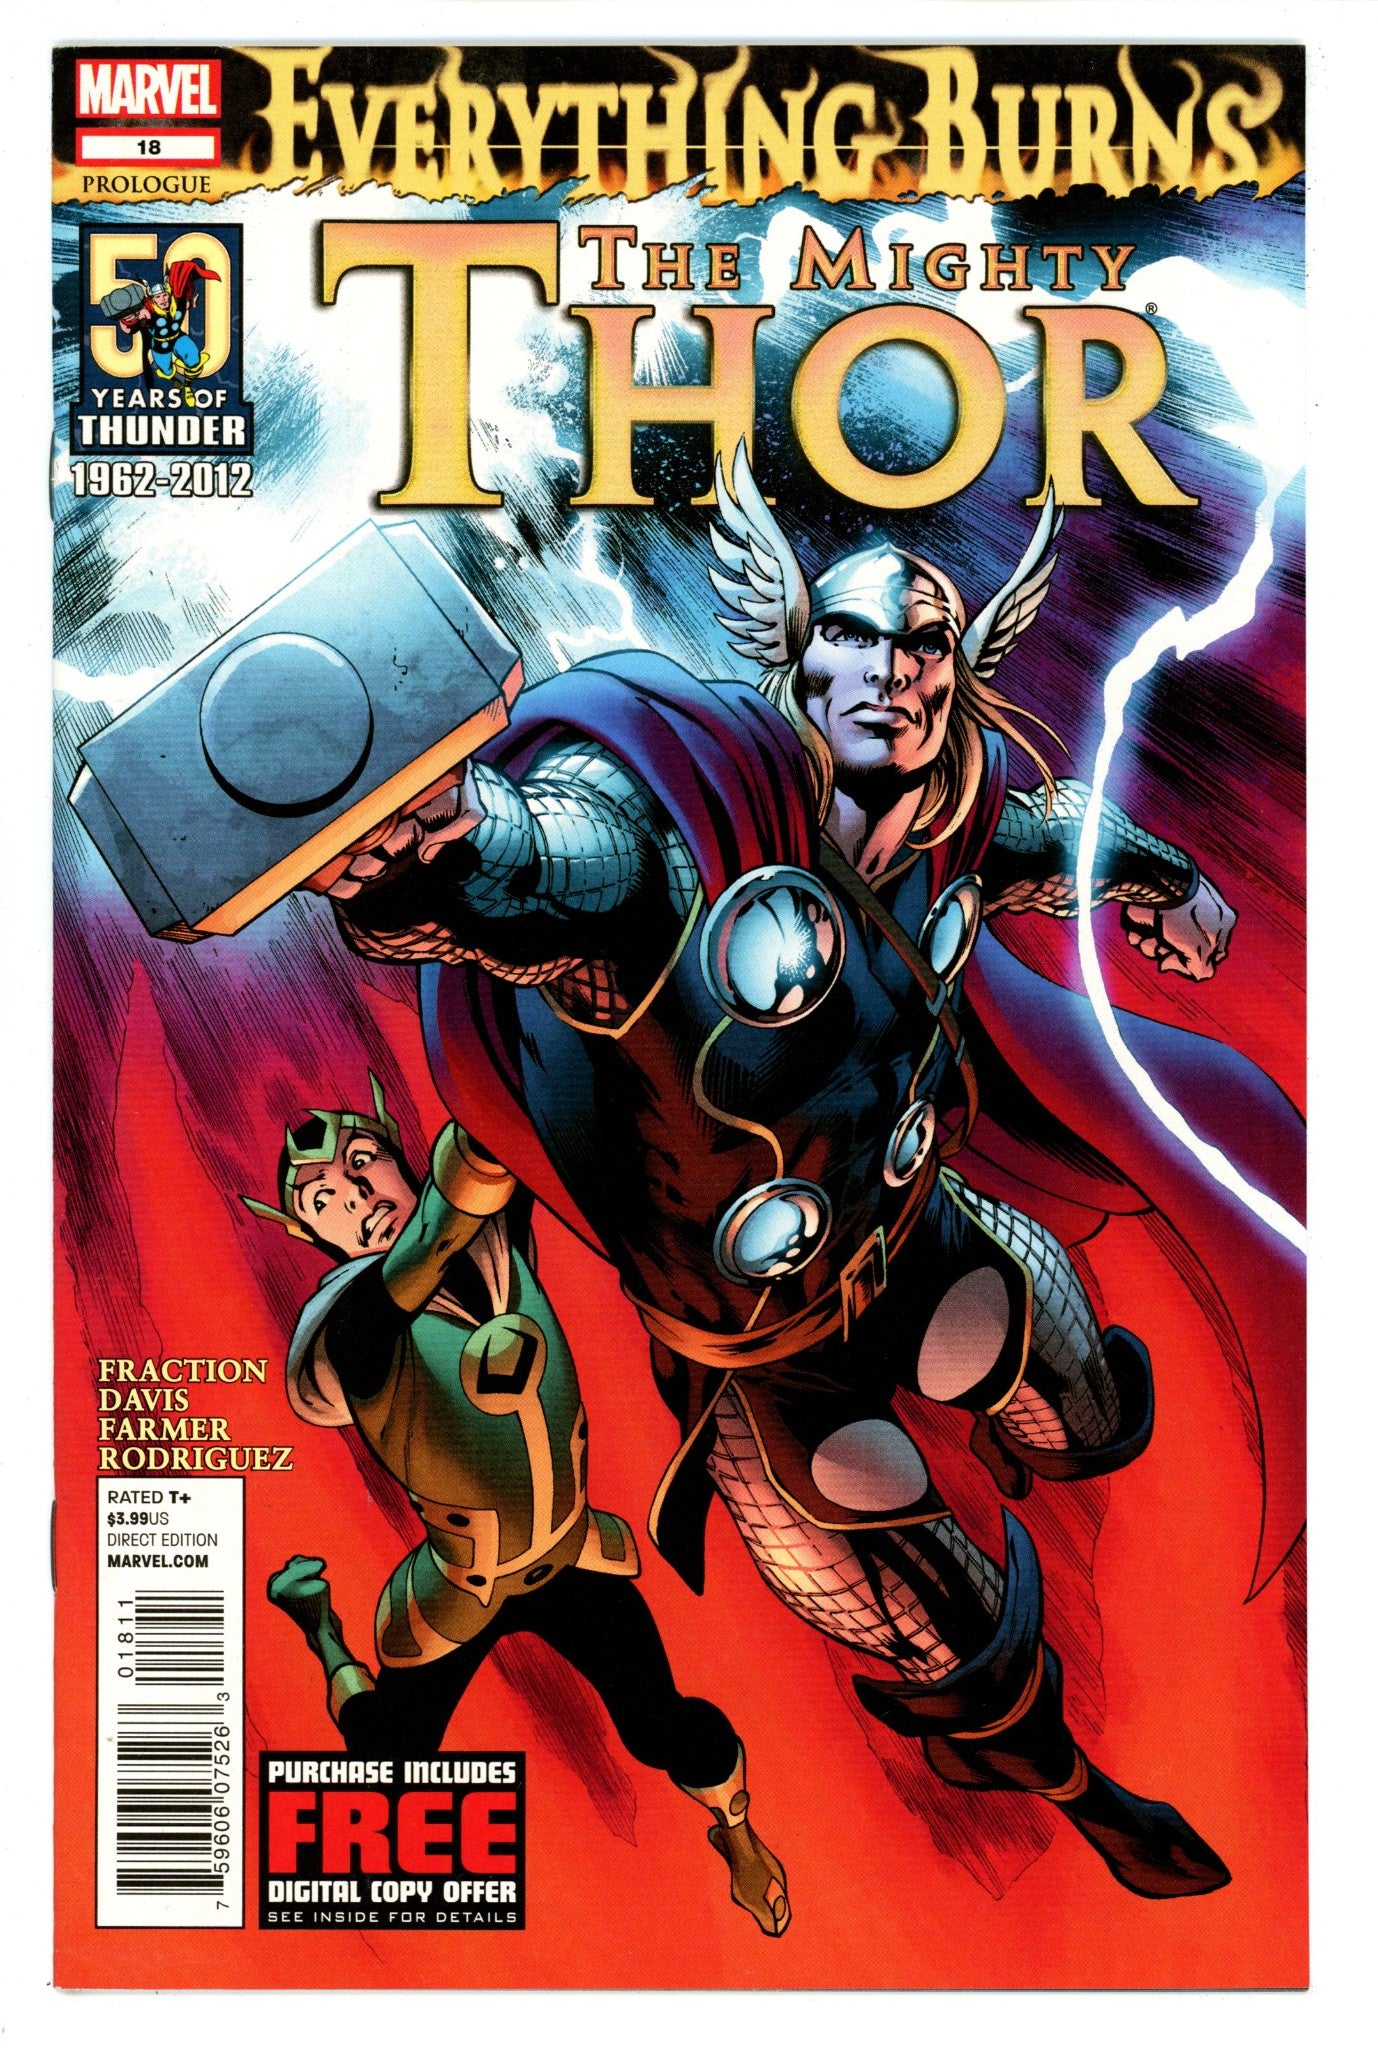 The Mighty Thor Vol 1 18 High Grade (2012) 